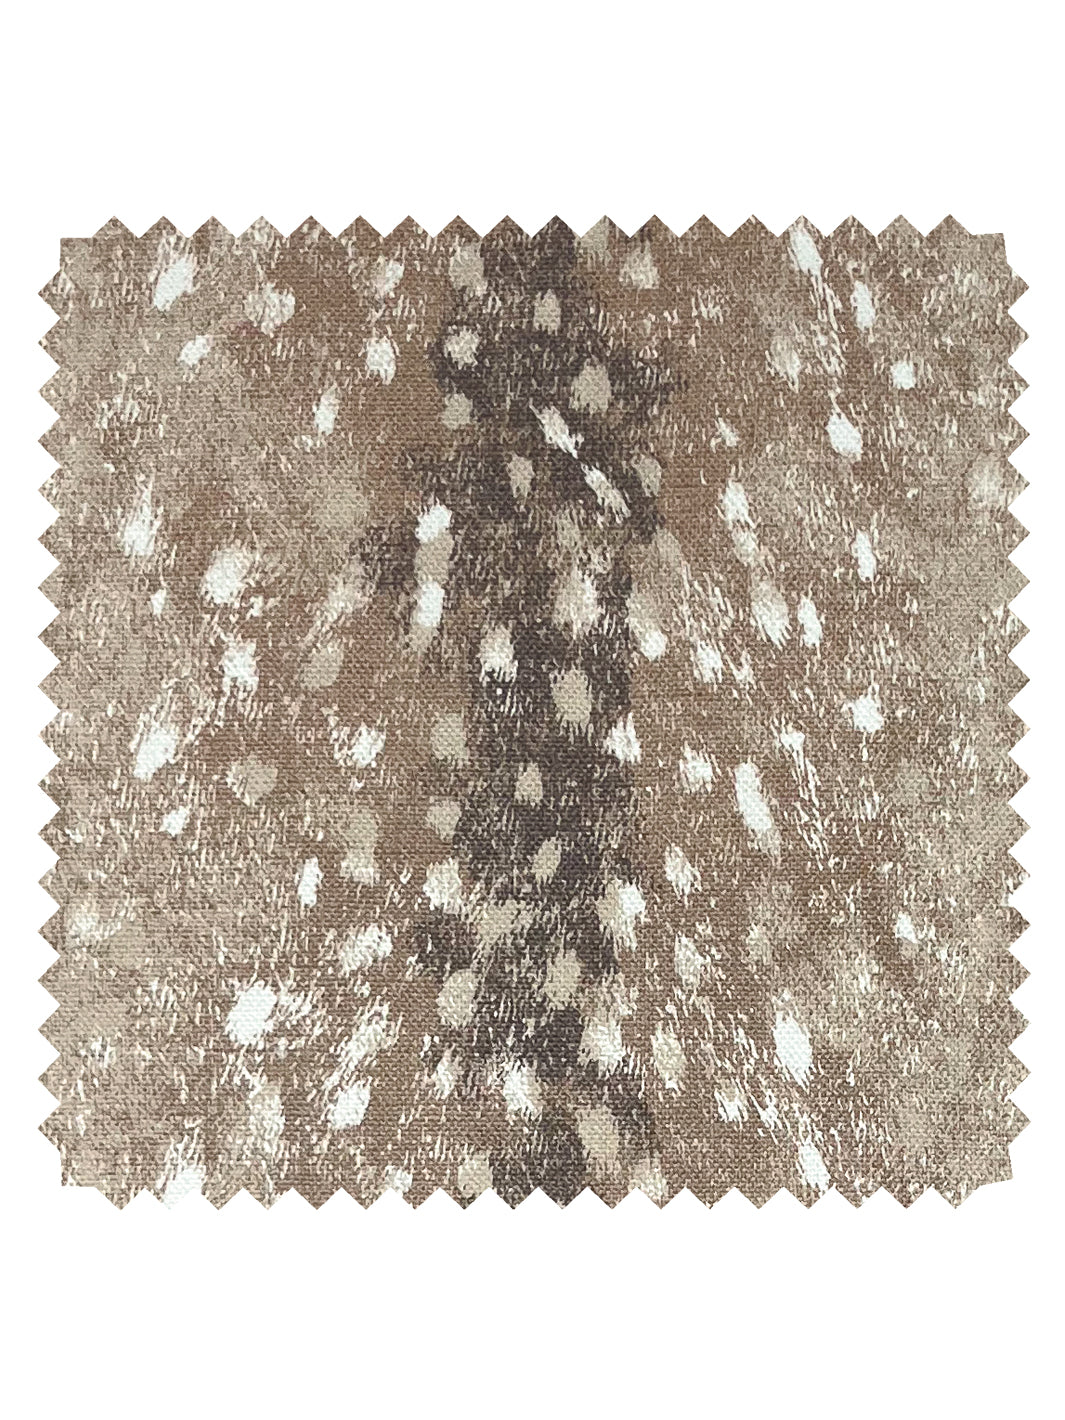 'Deer' Linen Fabric by Nathan Turner - Brown